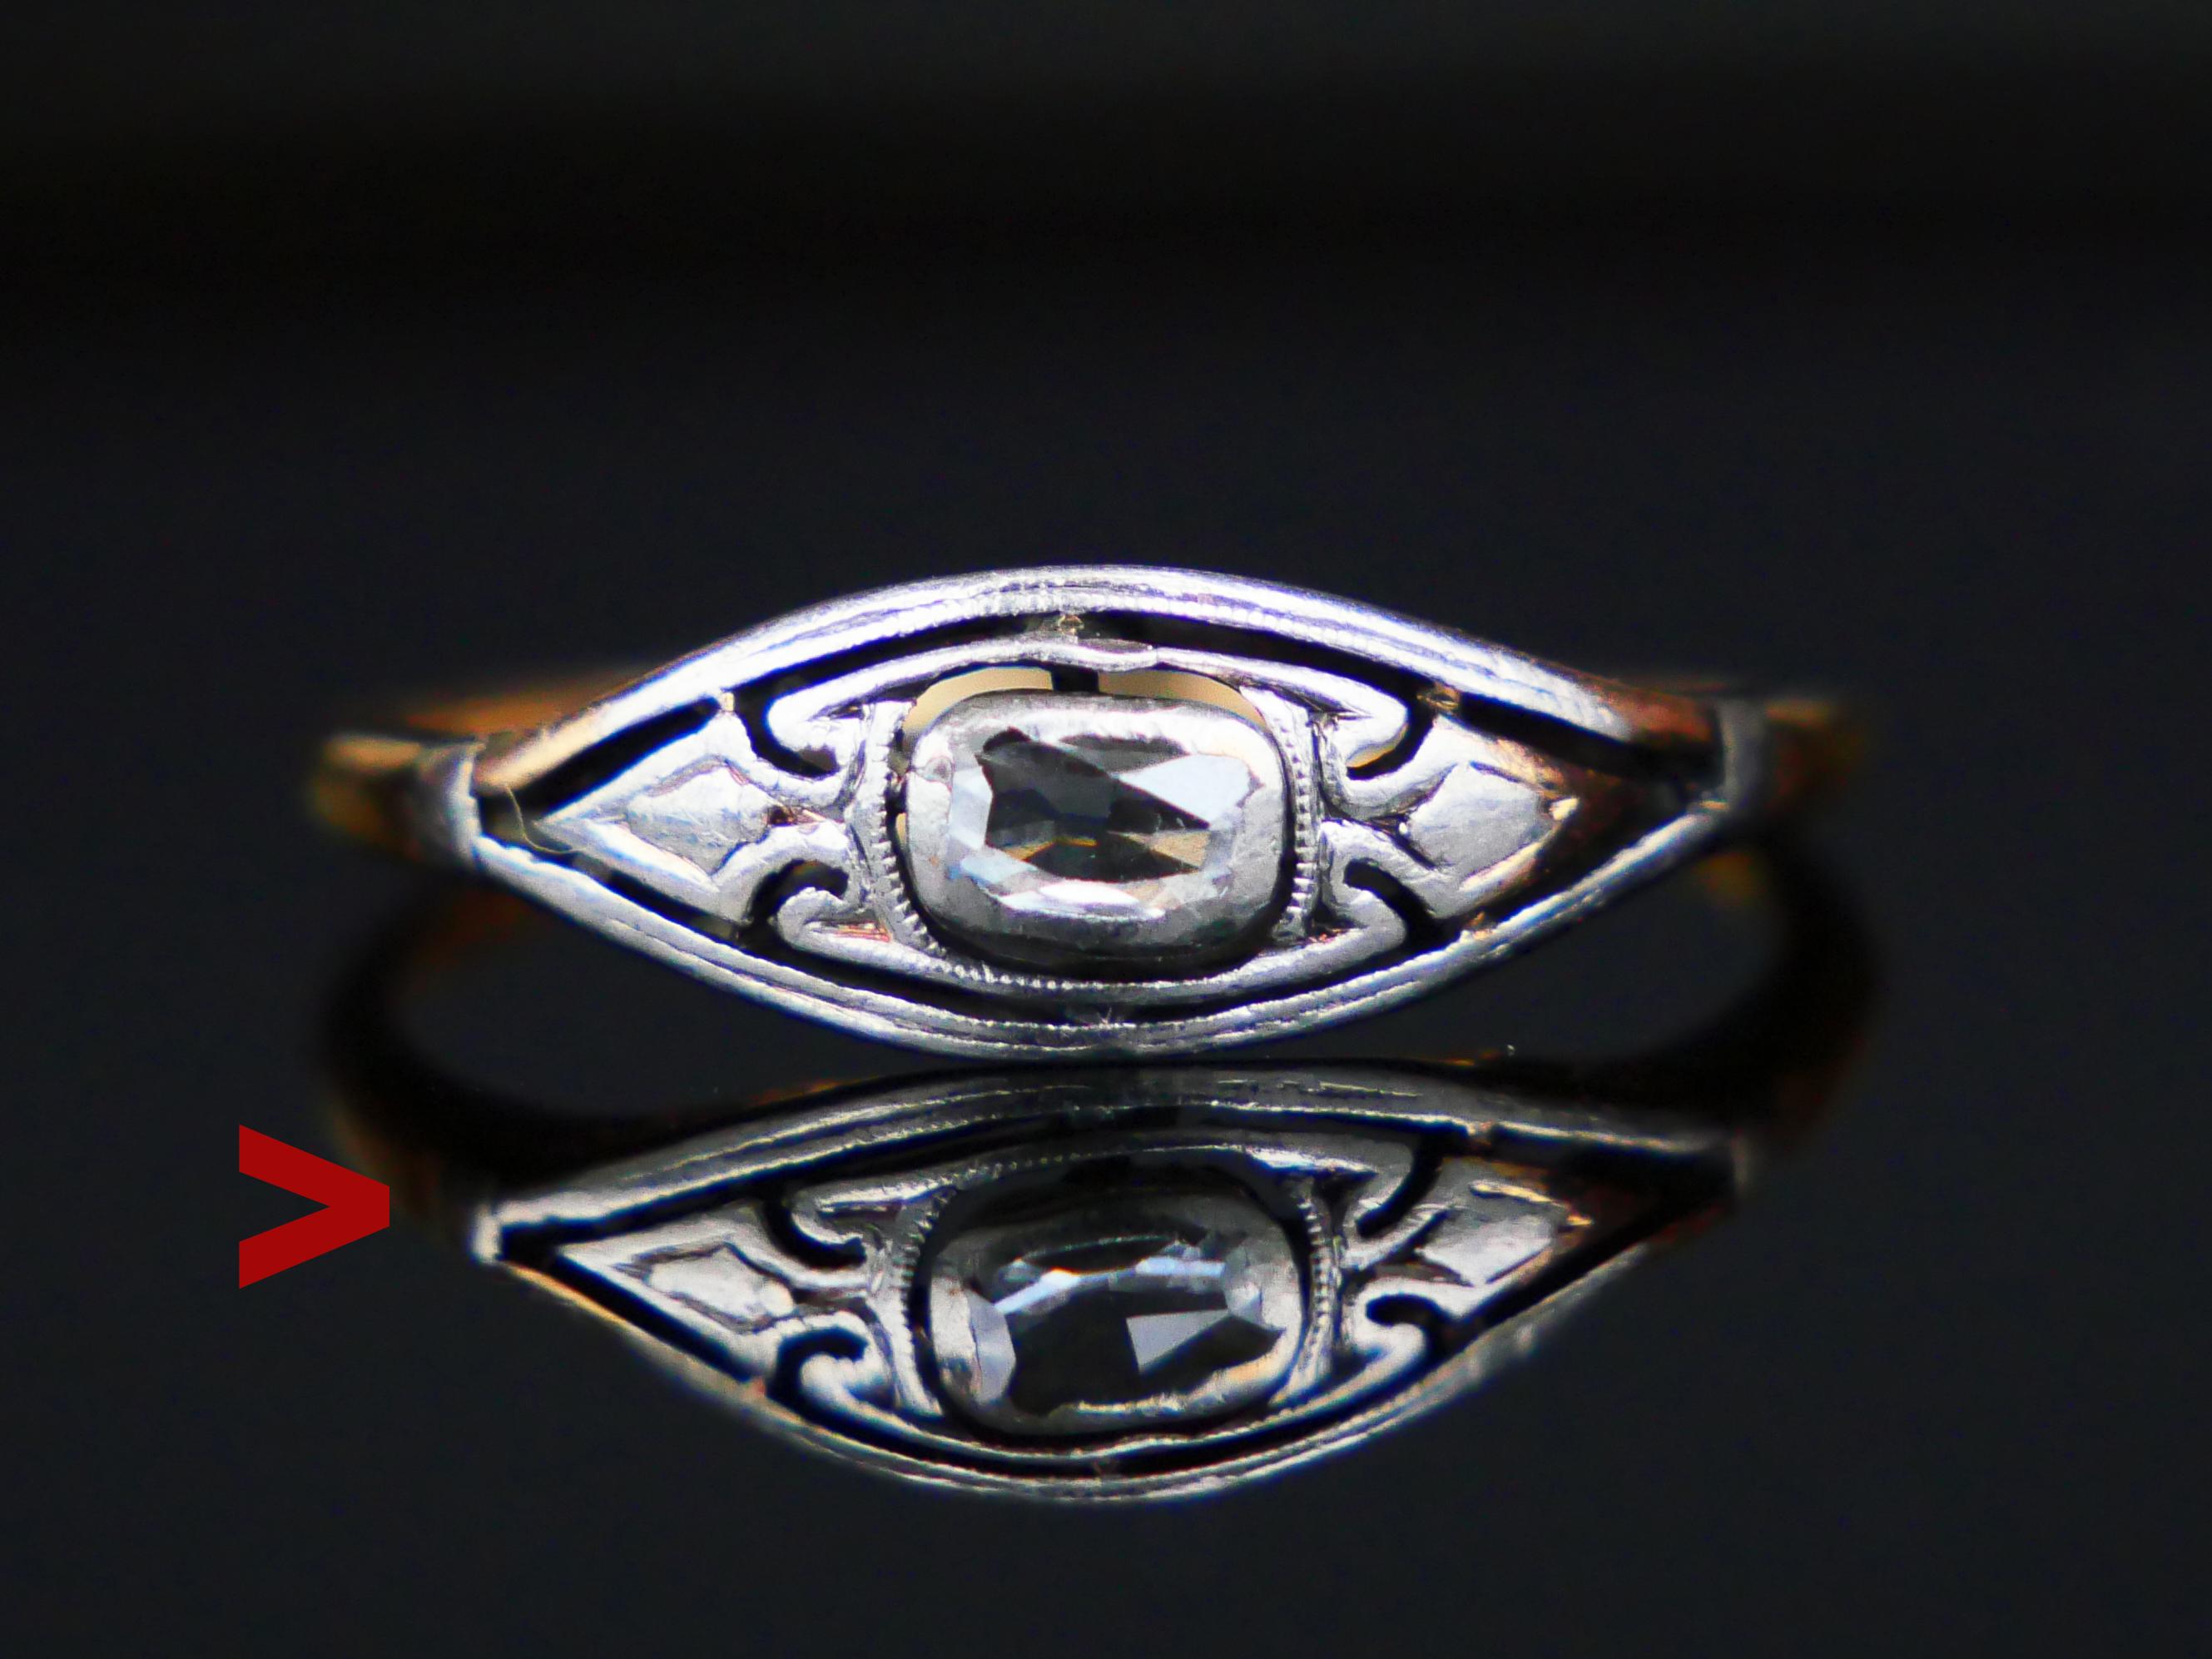 German Ring of unusual design ca. 1920s -1930s.

Intricate Silver openwork crown 16 mm x 6 mm at axes x 3 mm deep with fancy radiant cut Diamond stone (natural) measuring 4.25 x 3.25 mm x 1mm deep / ca.0.5 ct, color ca. F, G /VS, with open back.